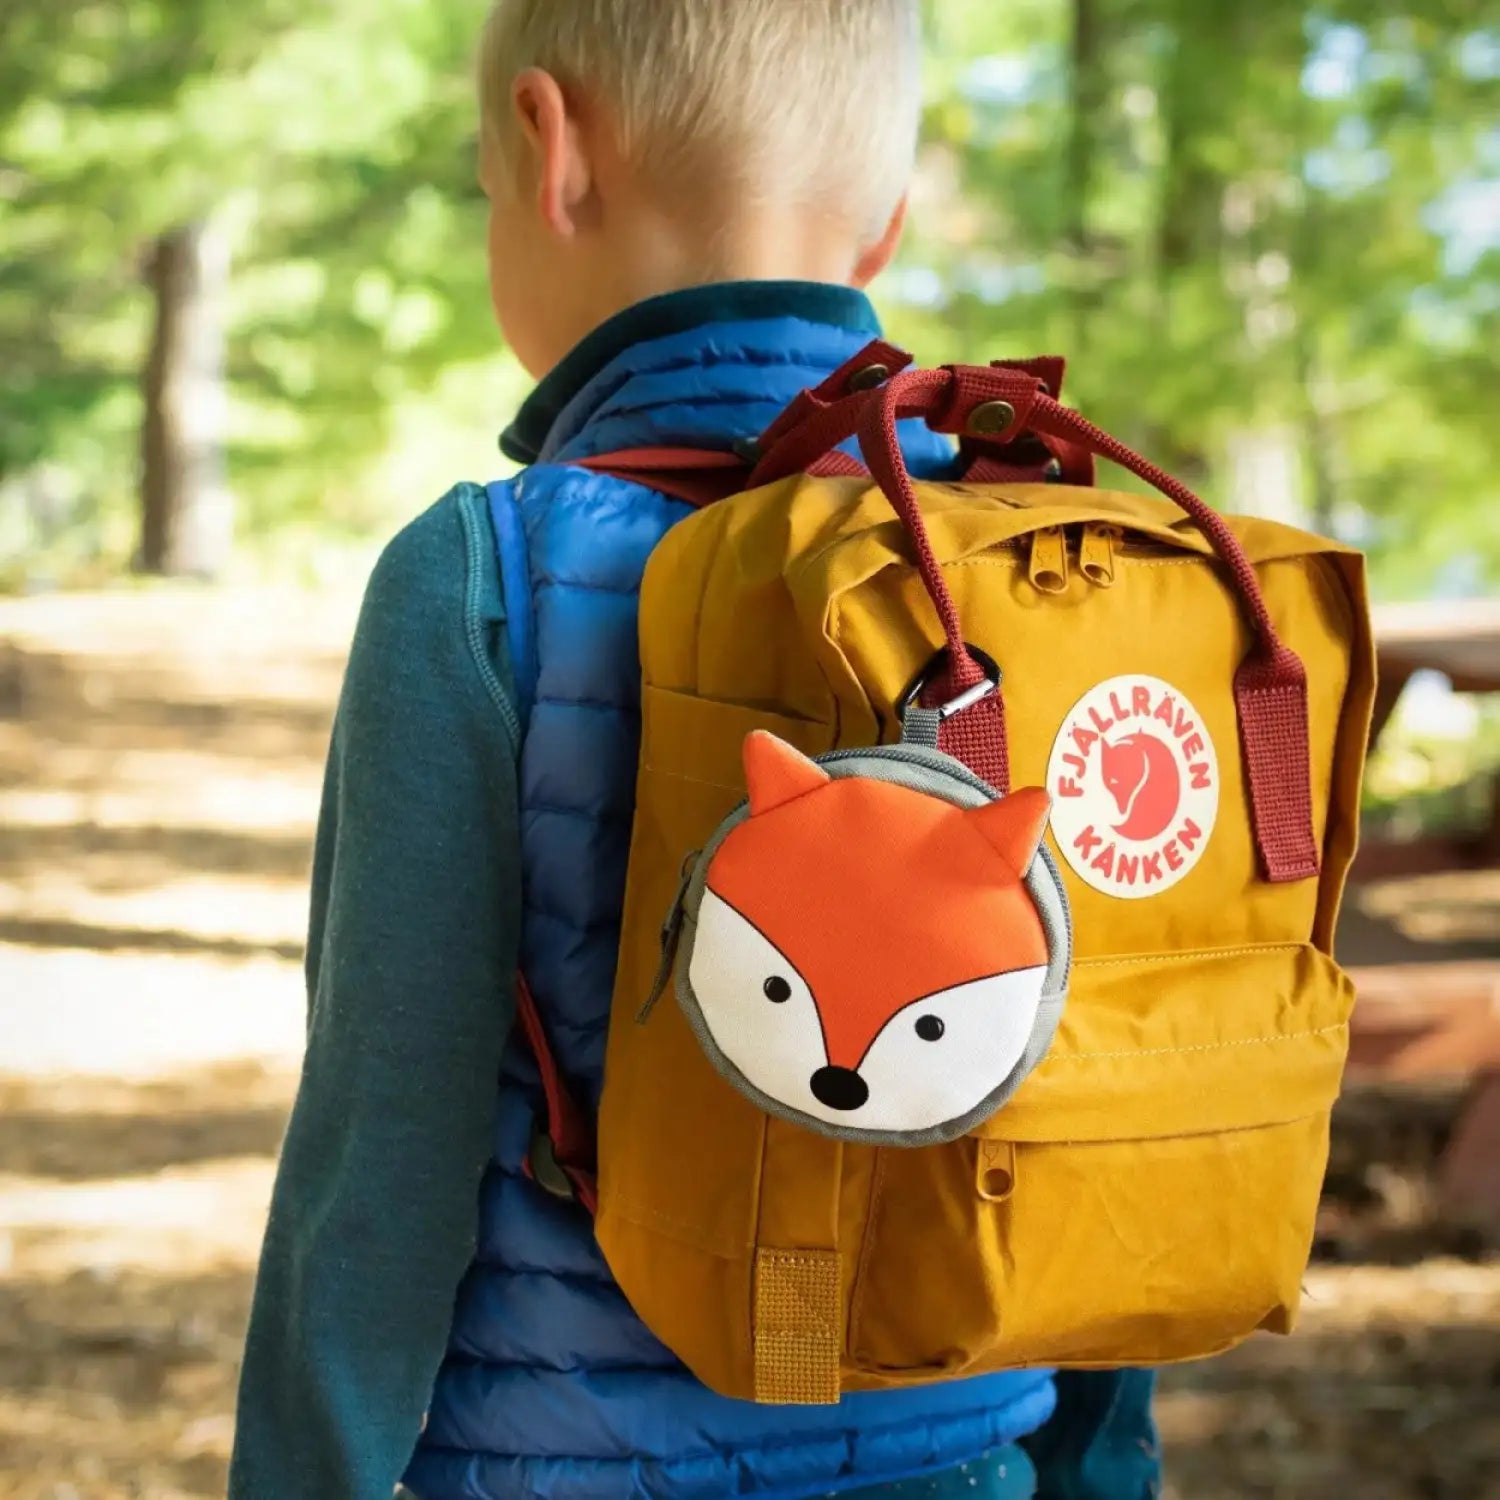 Fox First Aid kit clipped to backpack bring carried by a young child.